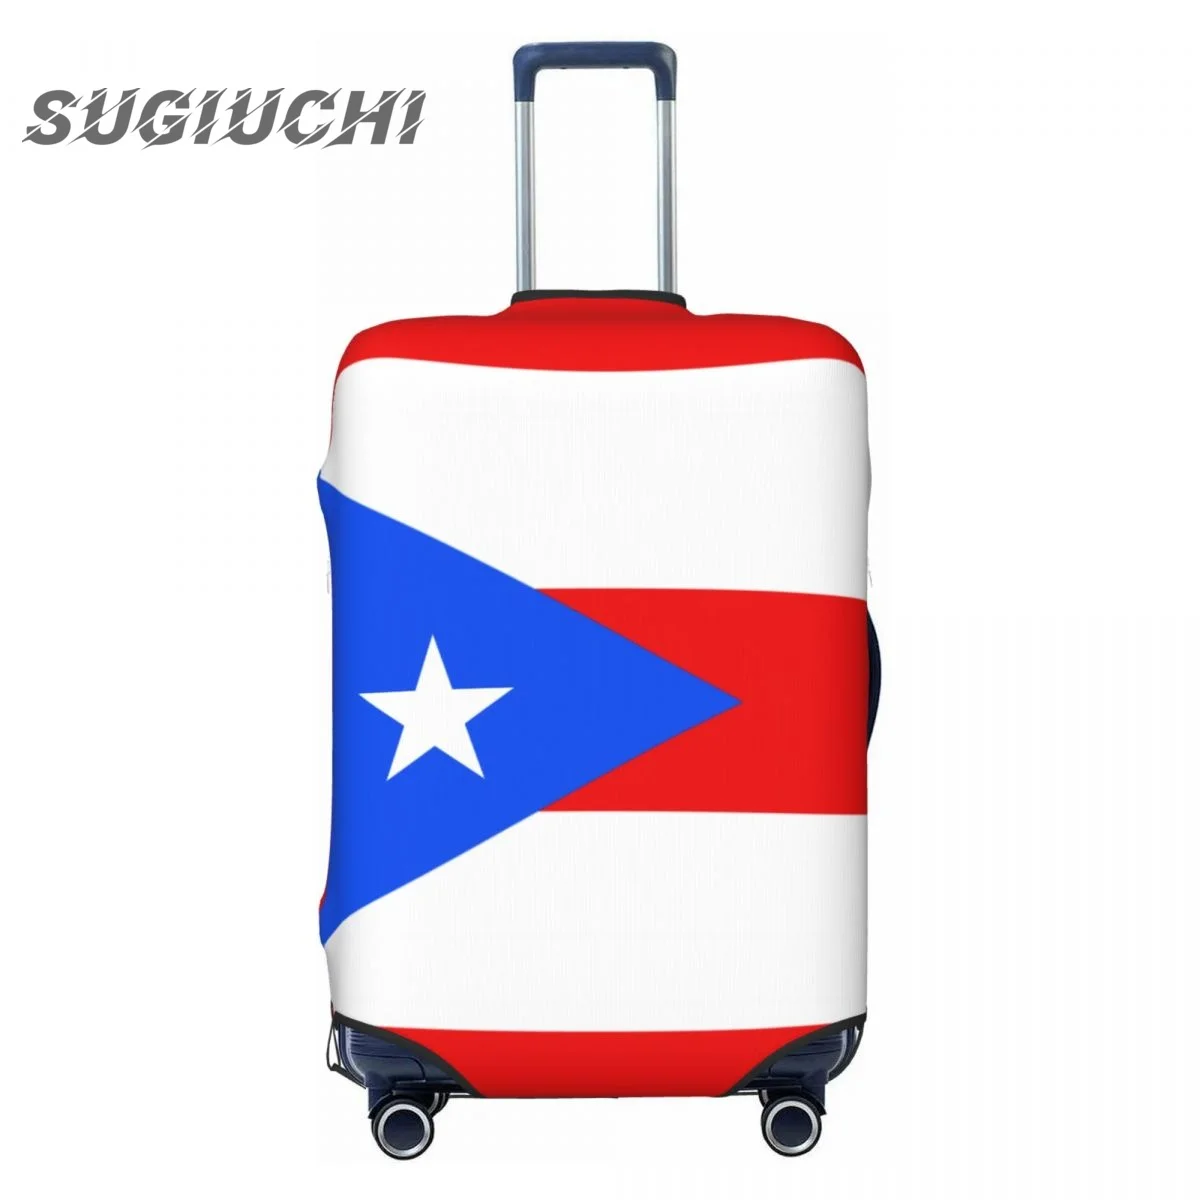 

Puerto Rico Country Flag Luggage Cover Suitcase Travel Accessories Printed Elastic Dust Cover Bag Trolley Case Protective